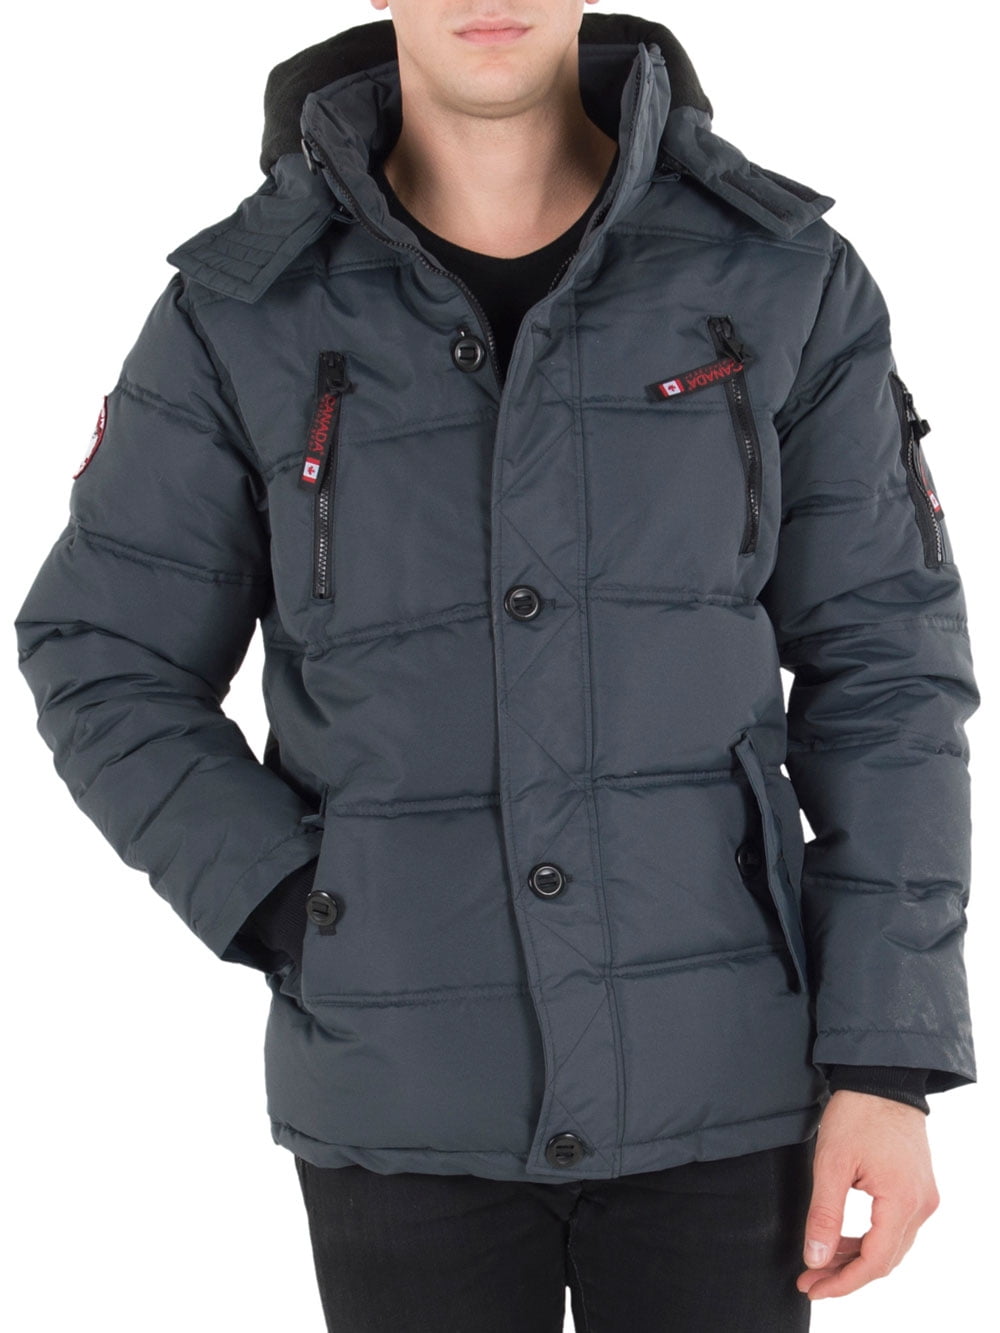 Canada Weather Gear - Canada Weather Gear Mens' Big and Tall Insulated ...